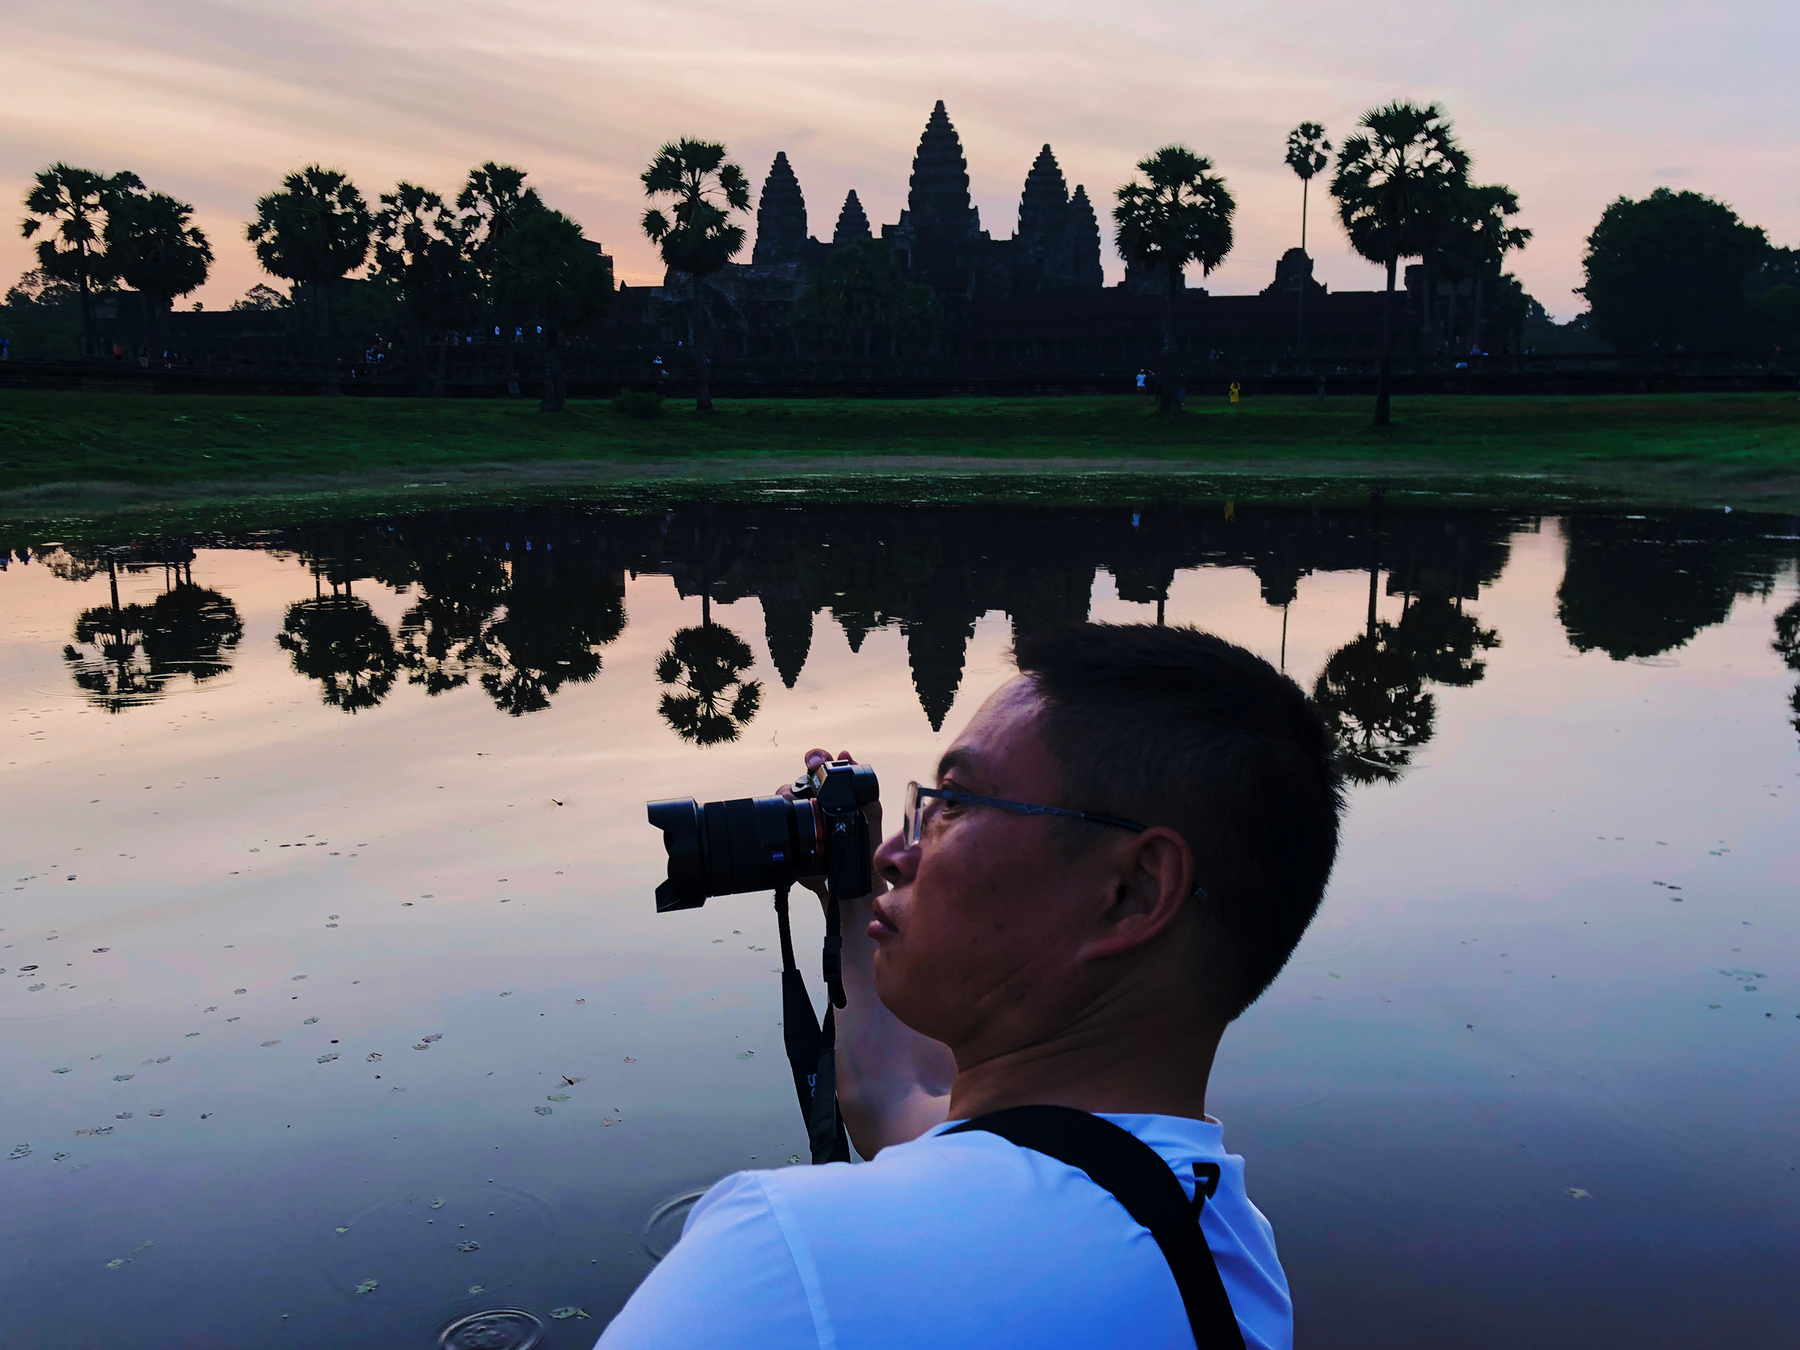 Sunrise over Angkor Wat. A man holds a camera in the foreground, the temple’s skyline in the background. 